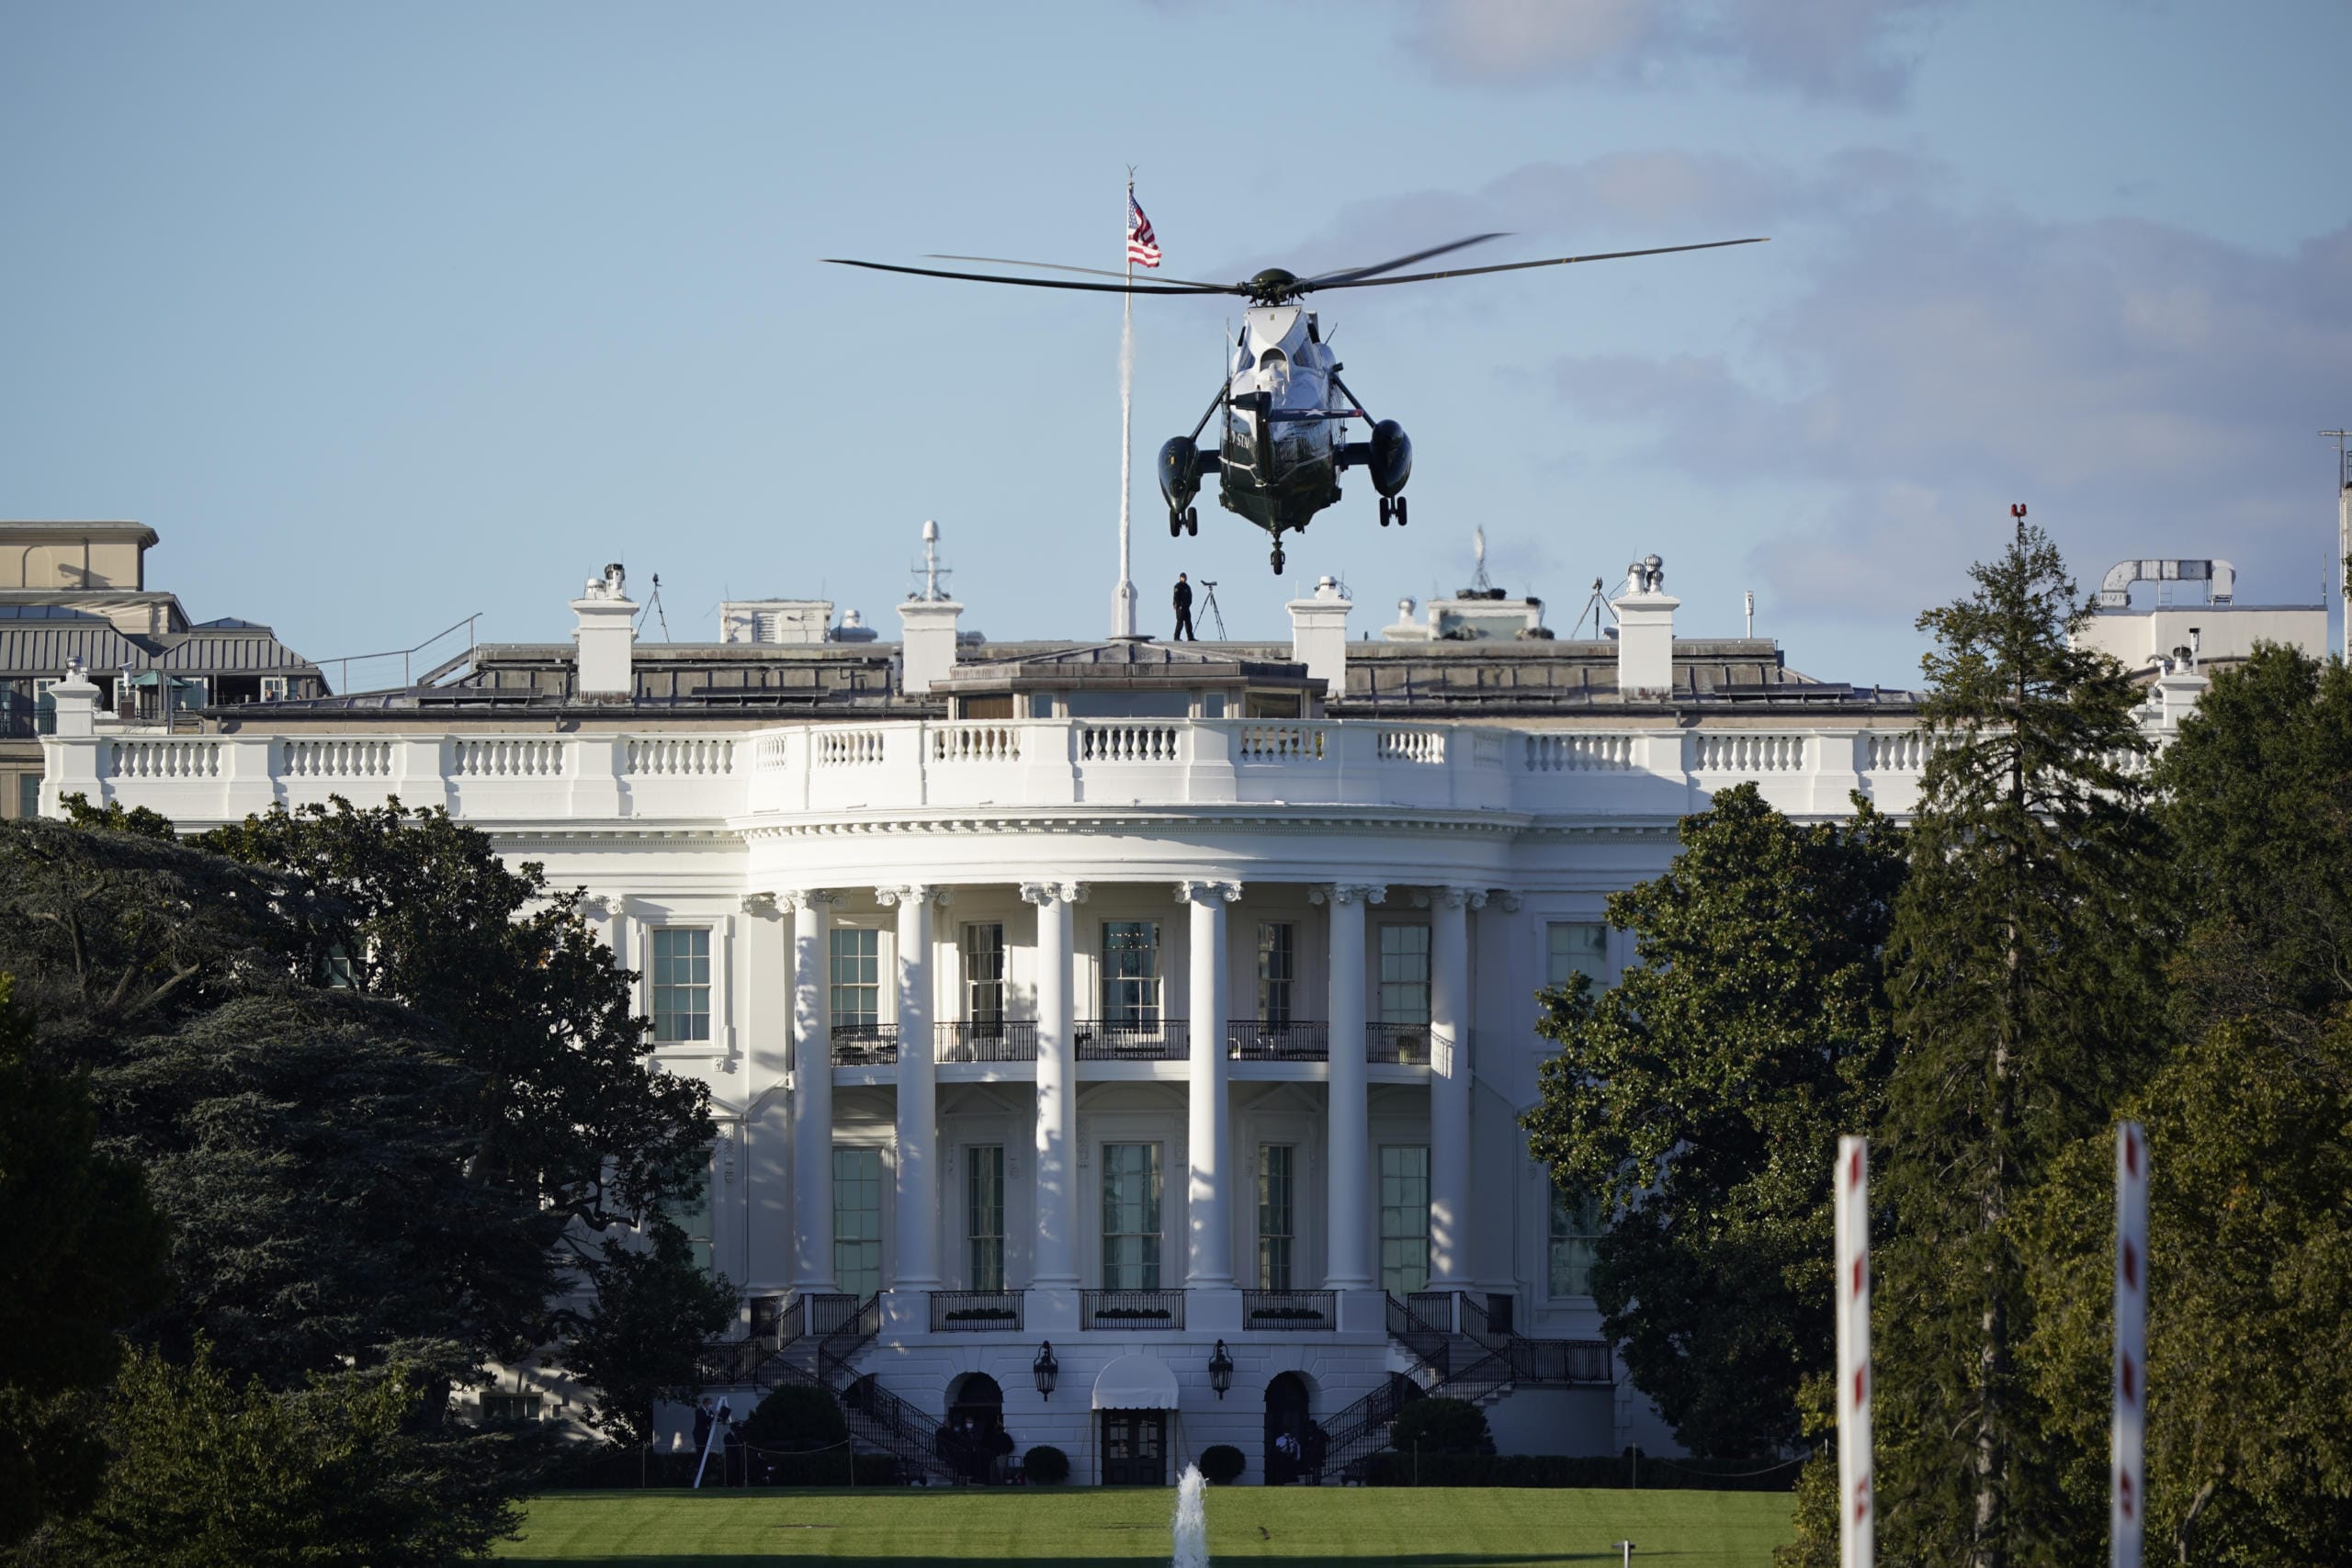 The helicopter that will carry President Donald Trump to Walter Reed National Military Medical Center in Bethesda, Md., lands on the South Lawn of White House in Washington, Friday, Oct. 2, 2020. The White House says Trump will spend a "few days" at the military hospital after contracting COVID-19. (AP Photo/J.